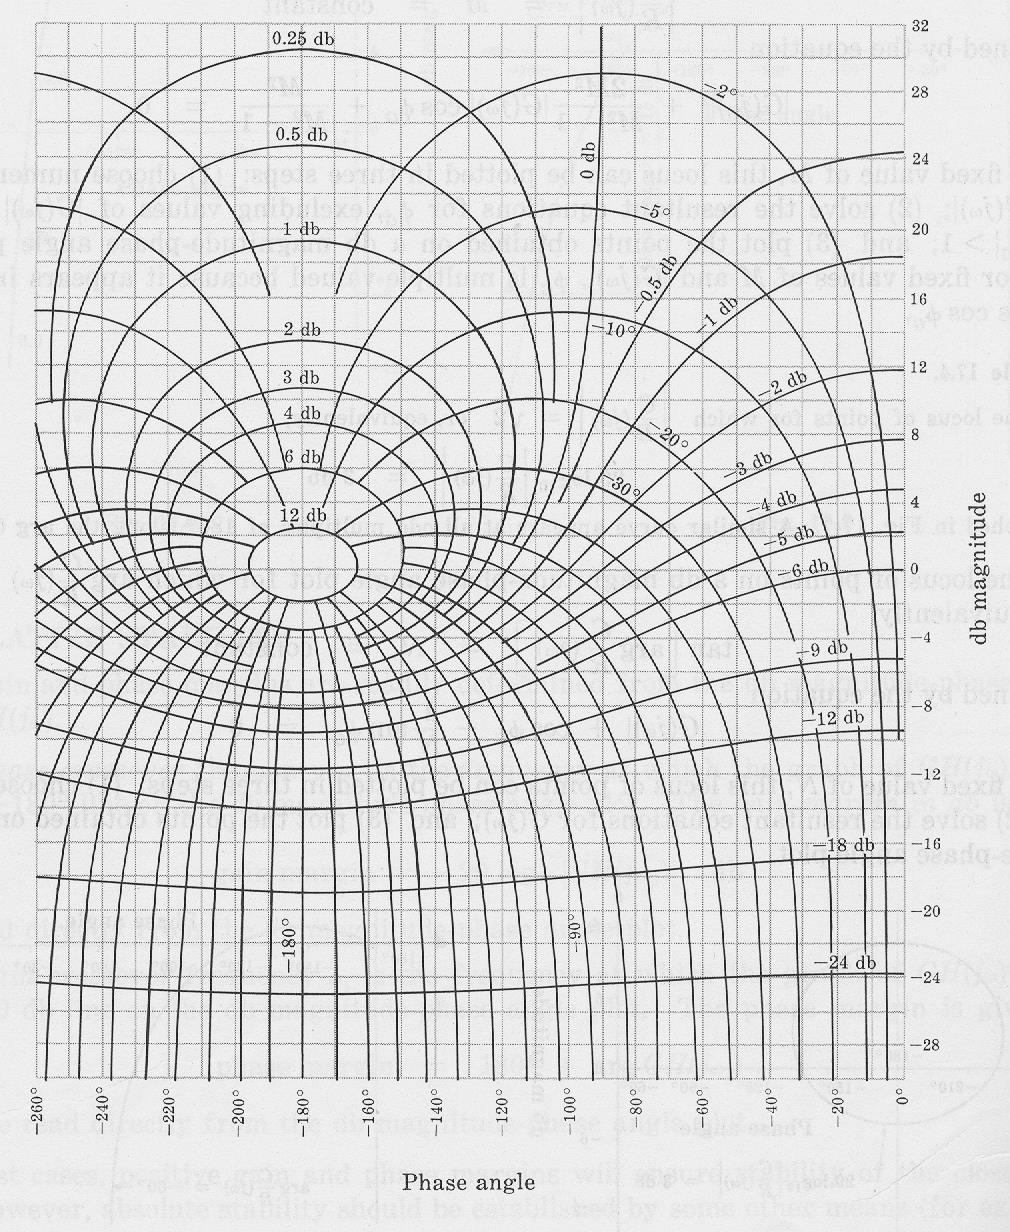 5 Fig. 2: The Nichols Chart with closed loop gain and phase contour lines overlaid on the rectangular coordinate system for the open loop response.